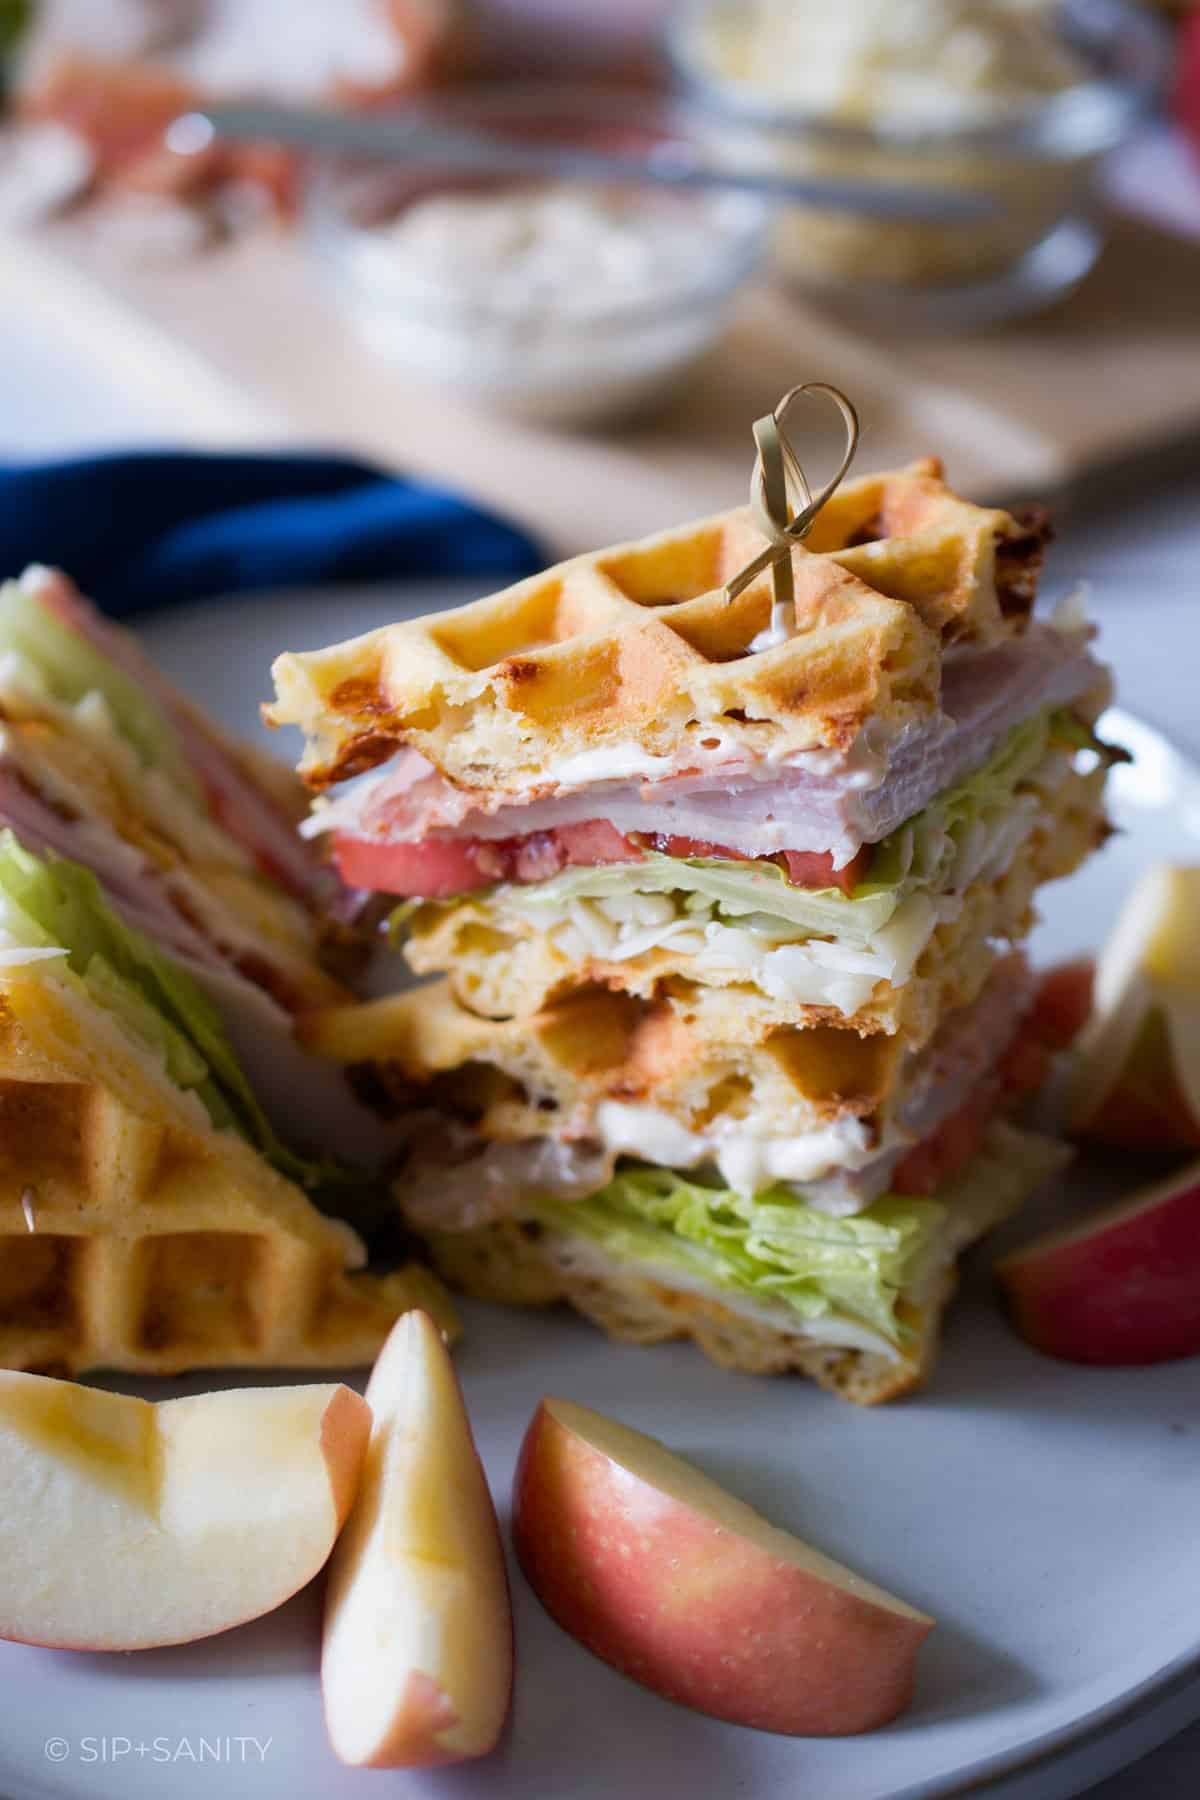 Waffle club sandwiches on a plate with apple slices.